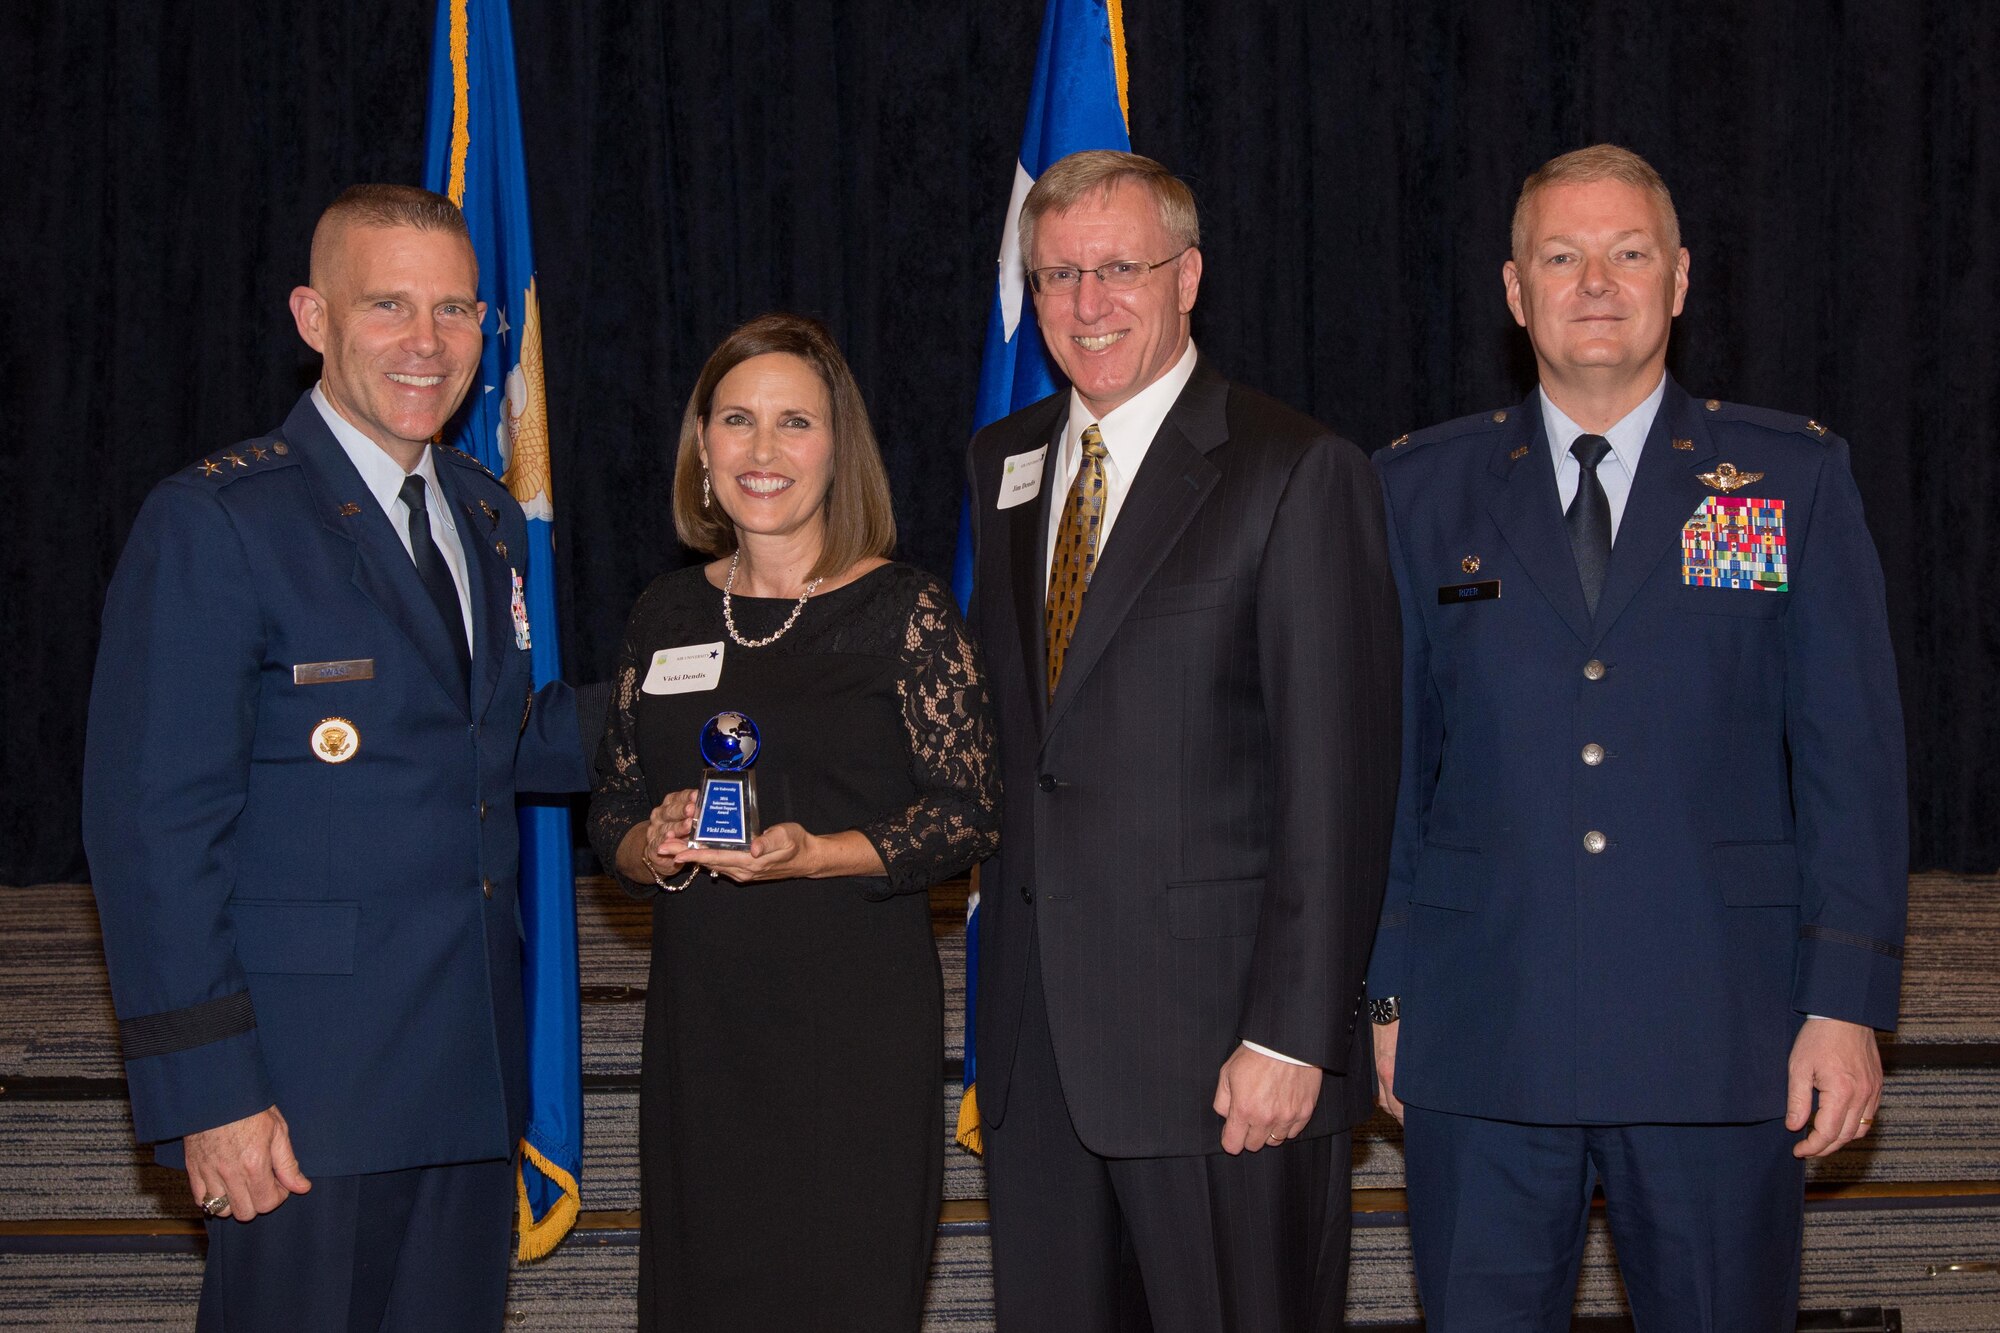 Lt. Gen. Steven Kwast, Air University commander and president, awards Vicki Dendis as the International Student International Student Support winner during the Alabama Goodwill Ambassadors Appreciation Night event, Jan. 17, 2017, Maxwell Air Force Base, Ala. Dendis' support to the International Officer School included her cultivation of a network between international families and the community through various activities and events. (US Air Force photo by Trey Ward)